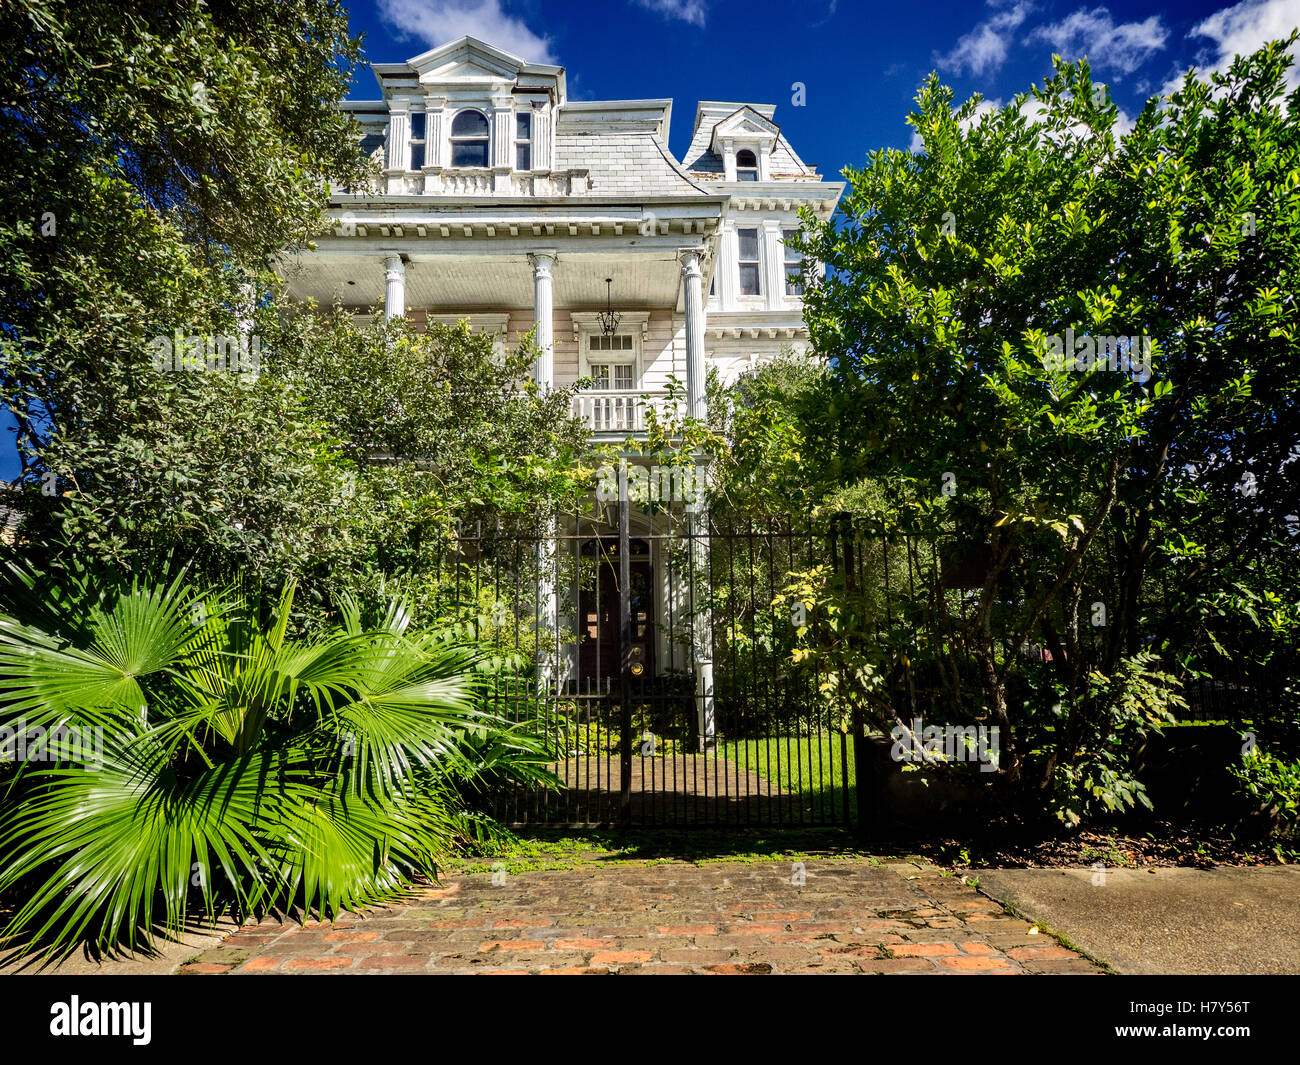 Old abandon house on St. Charles Ave New Orleans Stock Photo